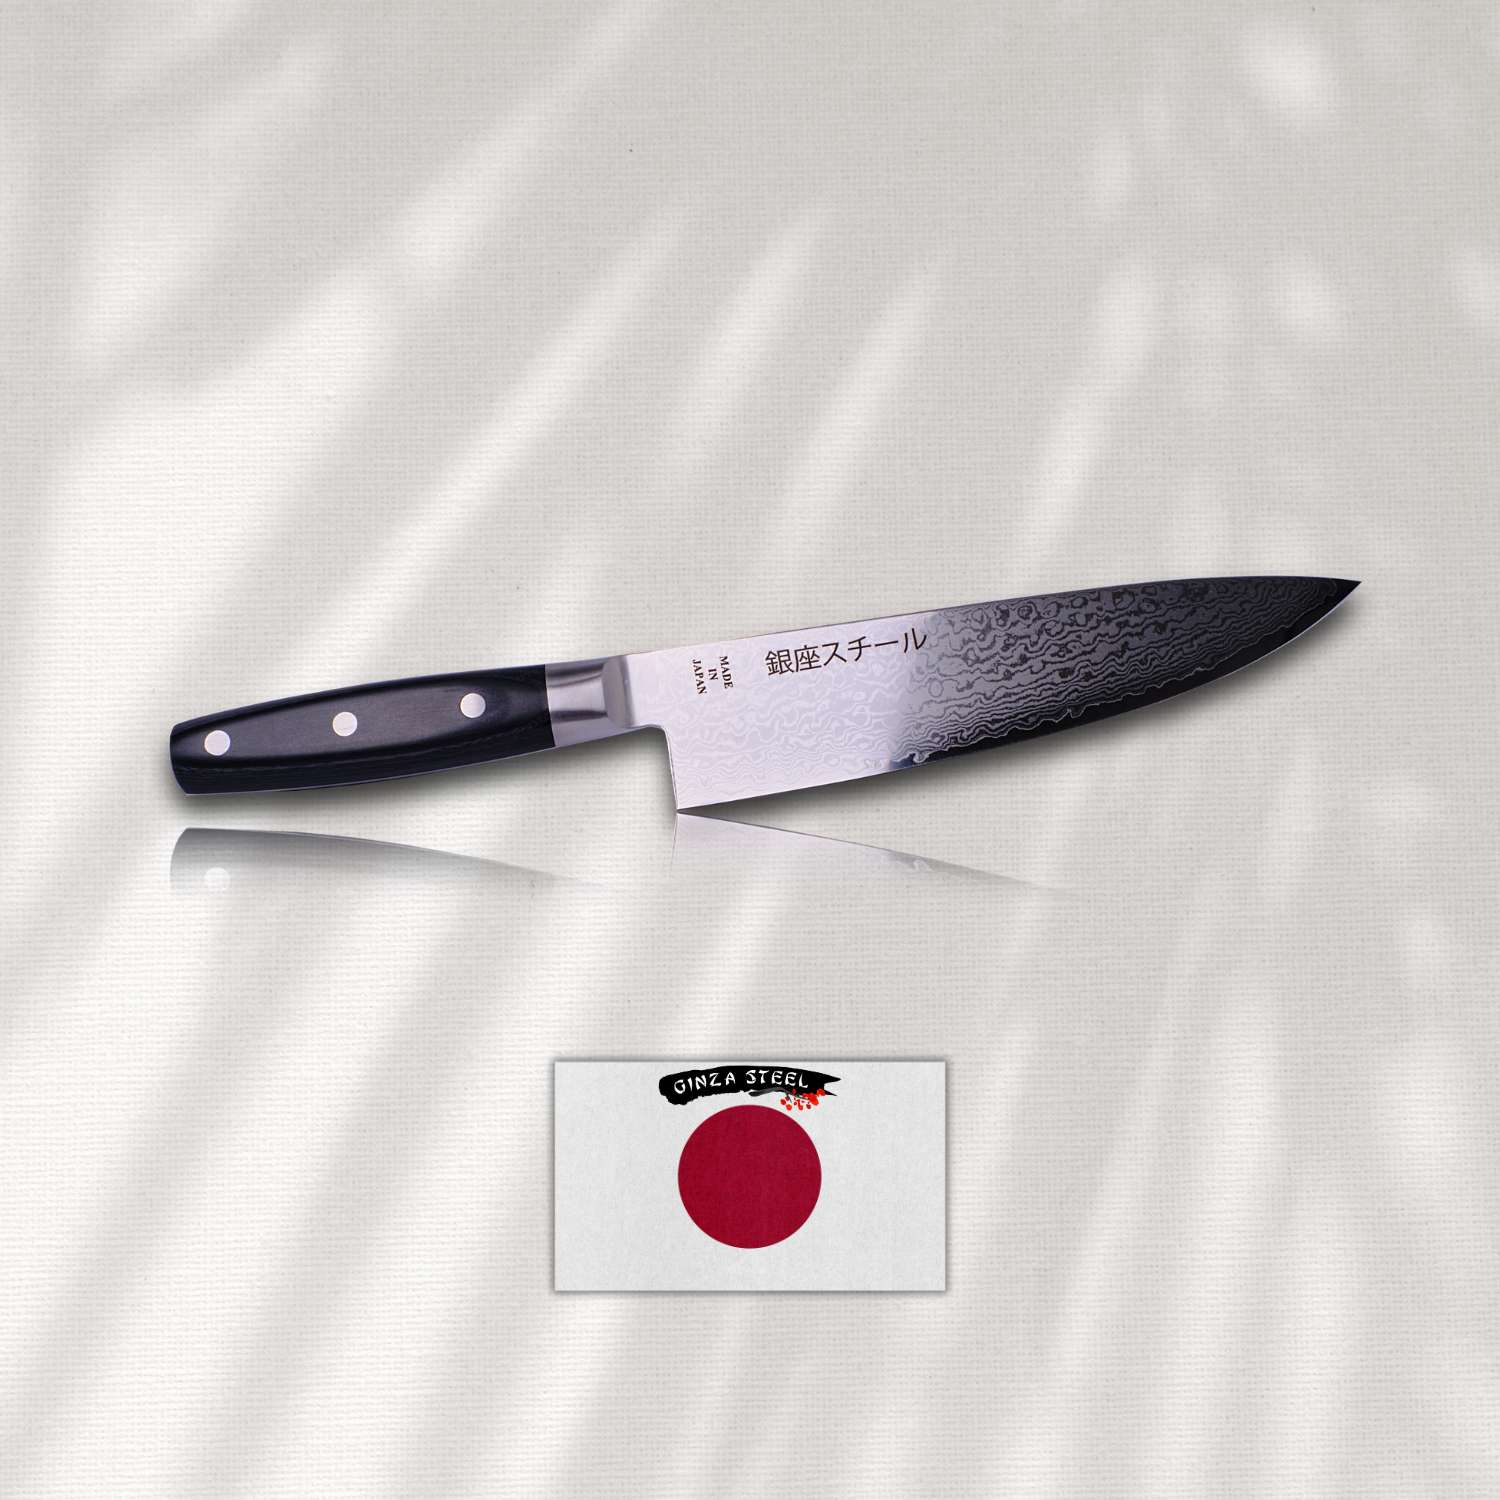 Made in Japan Knives